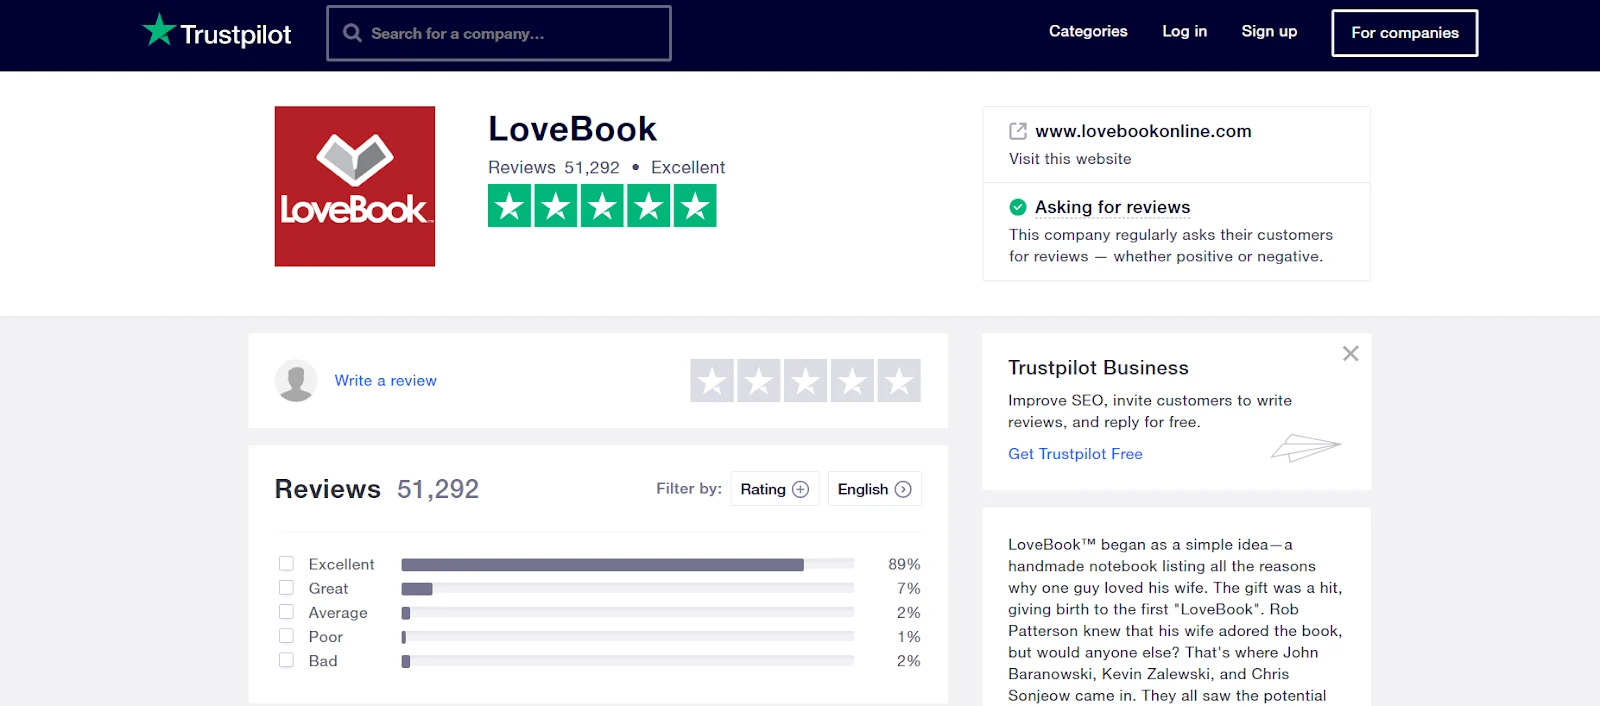 Companies can use Trustpilot reviews to carefully monitor customer sentiments around each product release, to make sure it goes smoothly and is well received by their customers.